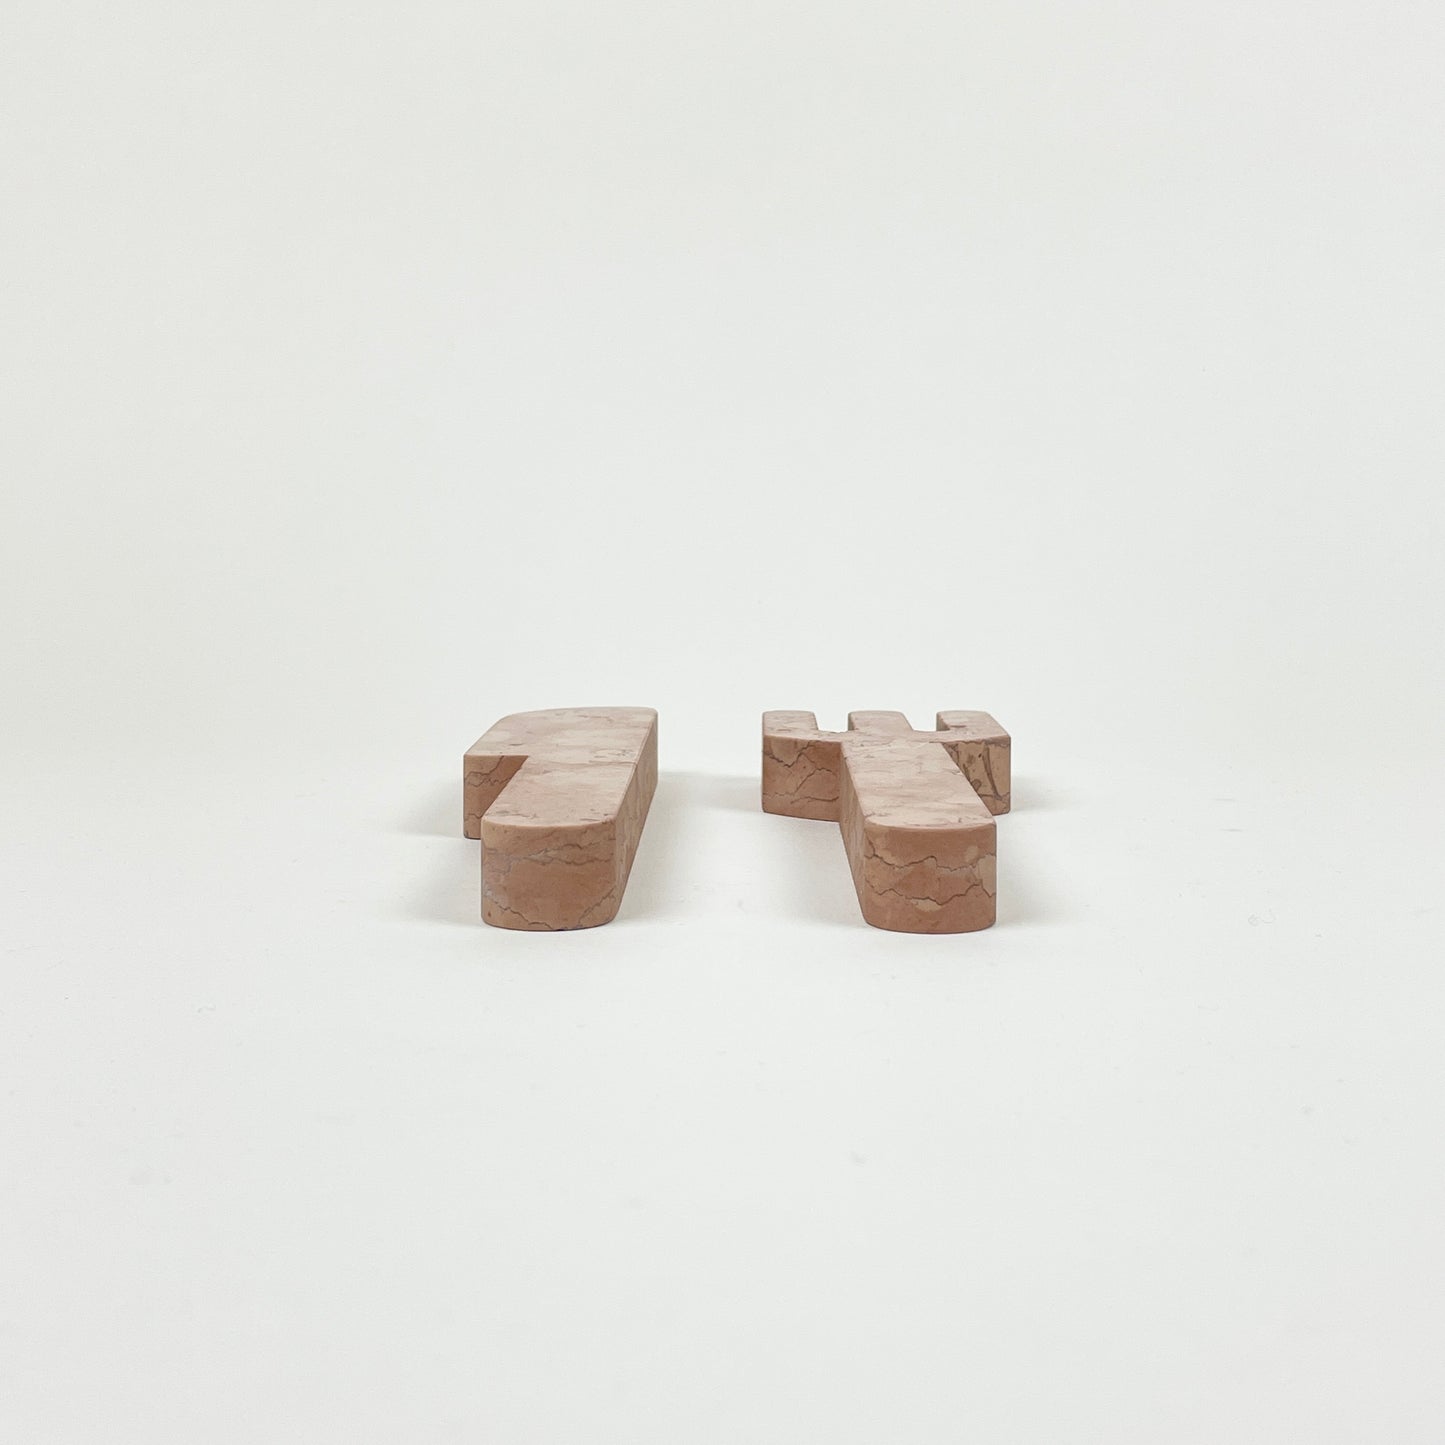 Marble cutlery by Public Studio, pink